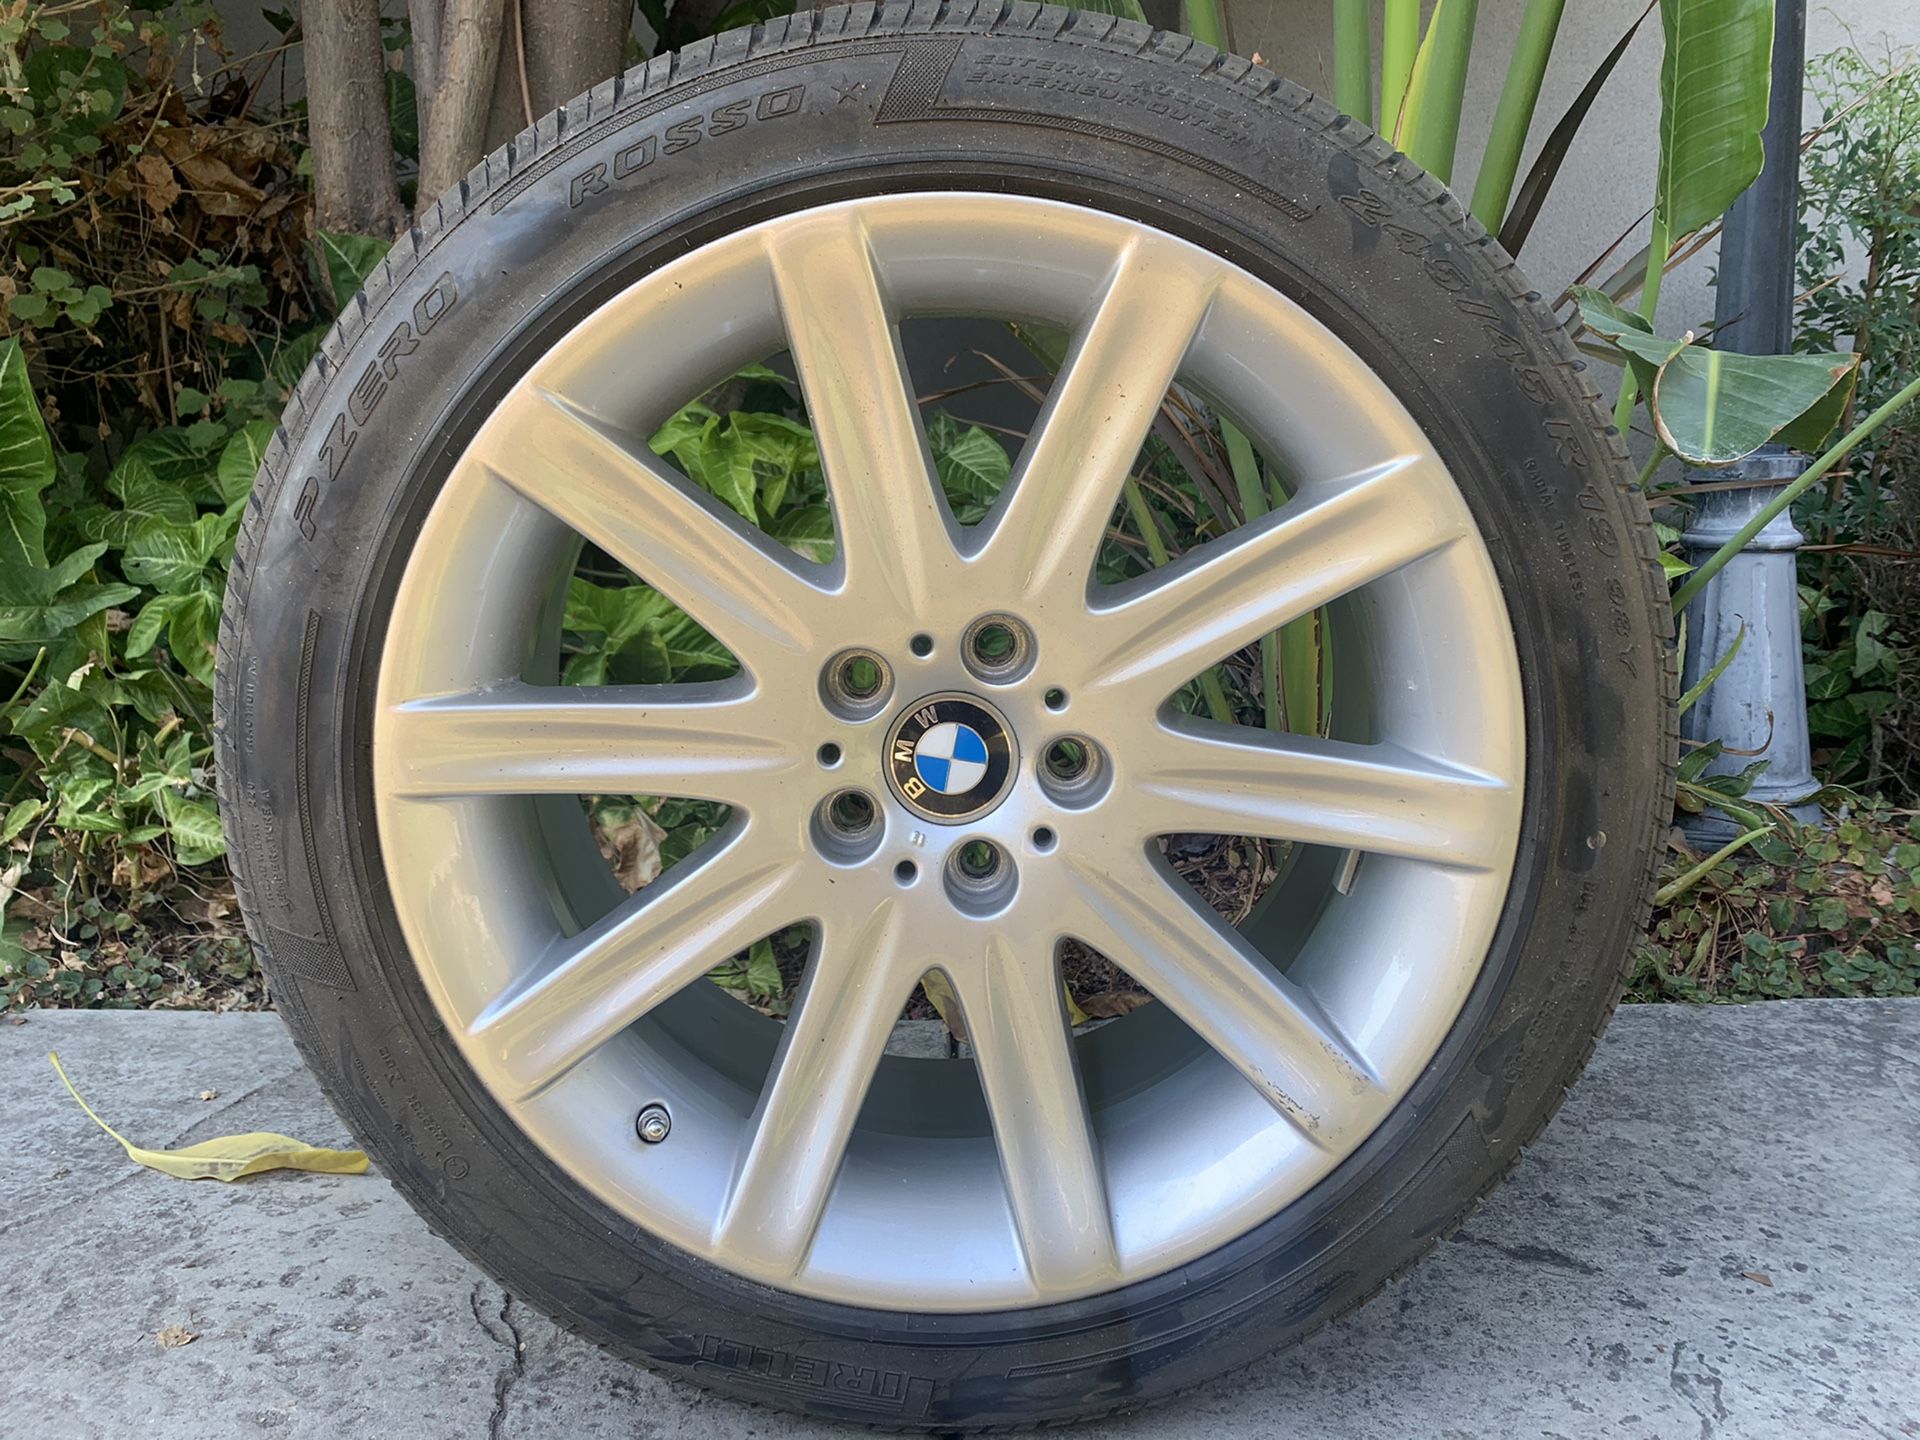 BMW 7 -Series 19 inch Oem Wheel style 95 & Pirelli Tires in great Condition Like New